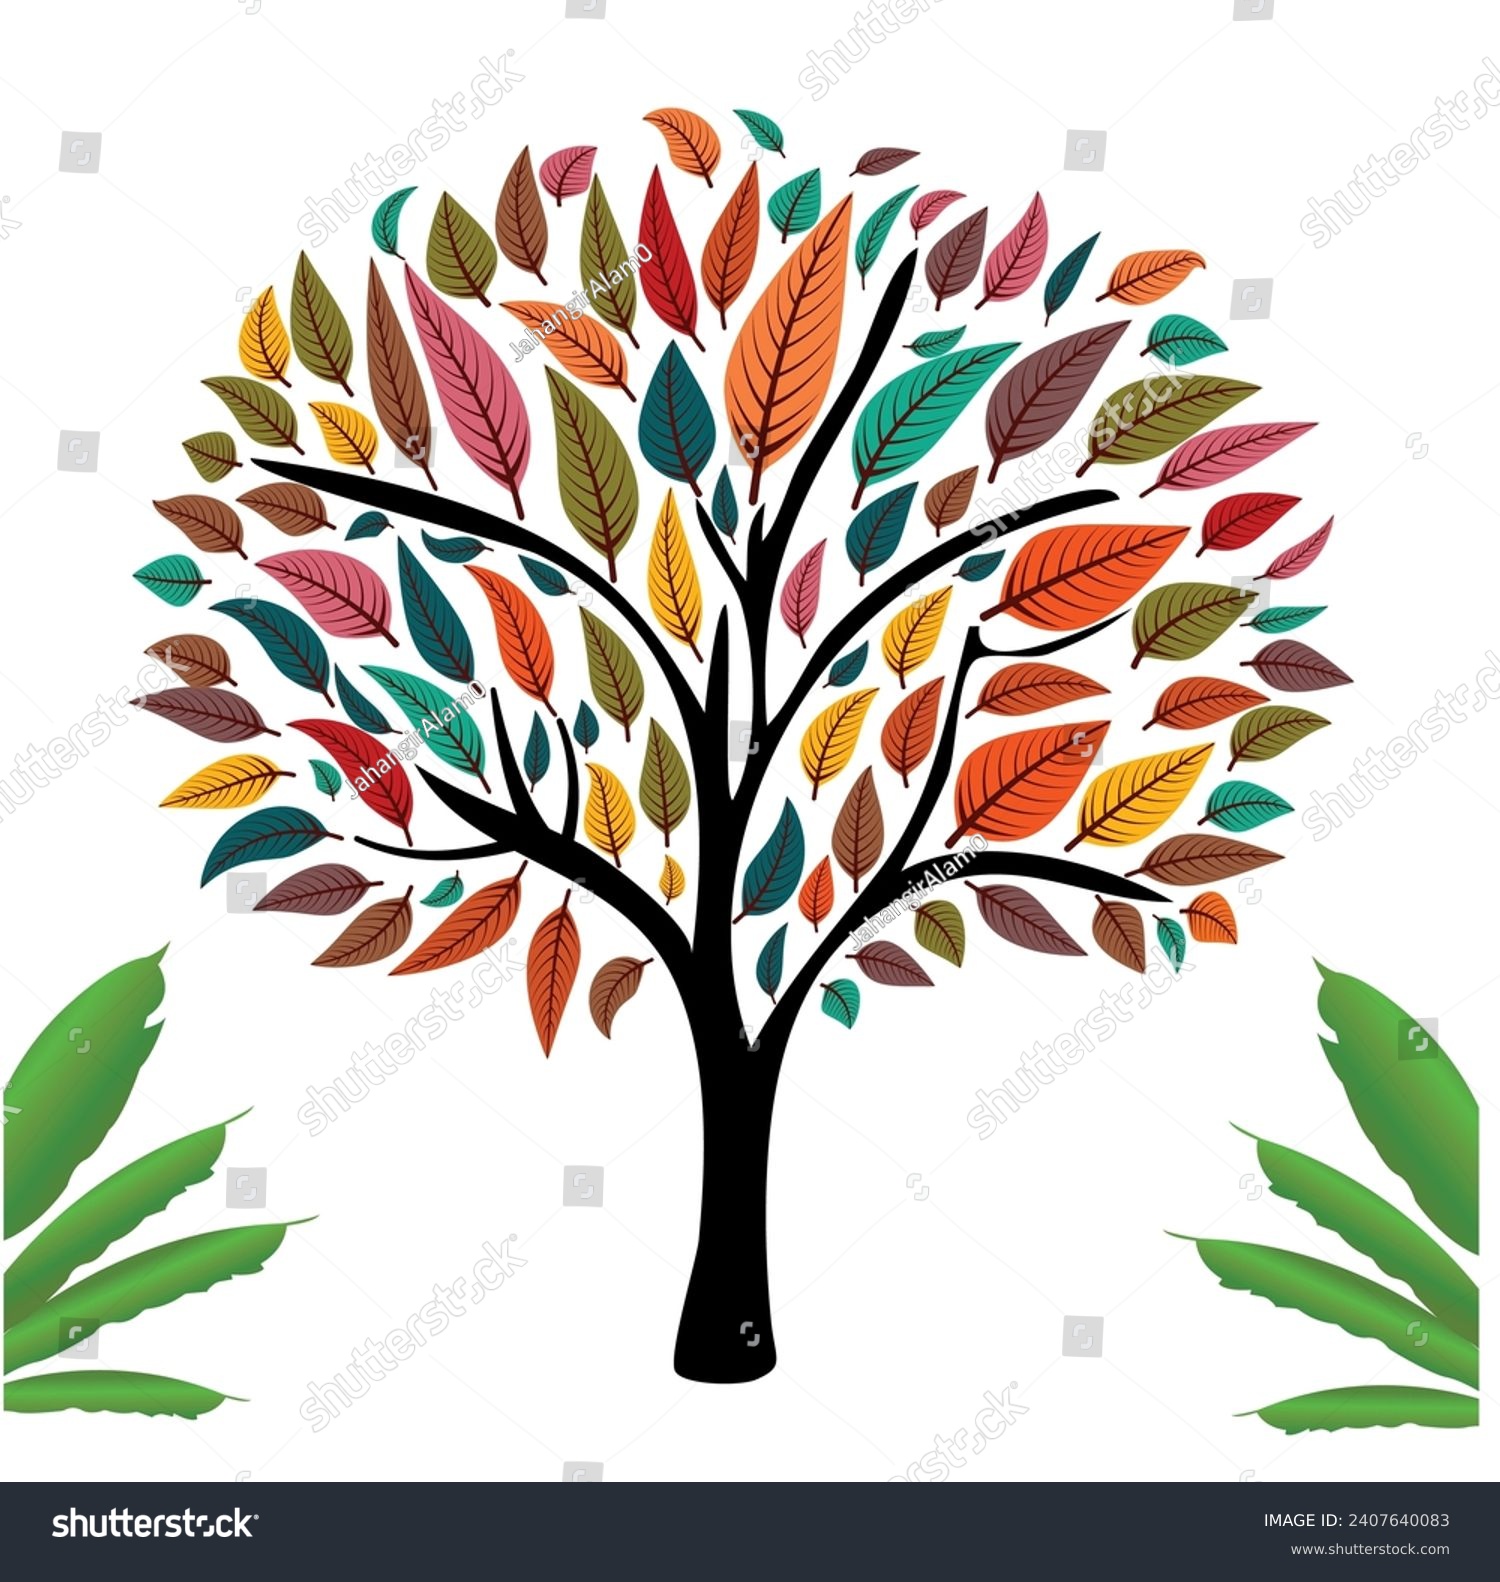 SVG of colorful tree with vibrant leaves hanging branches vector design white background svg